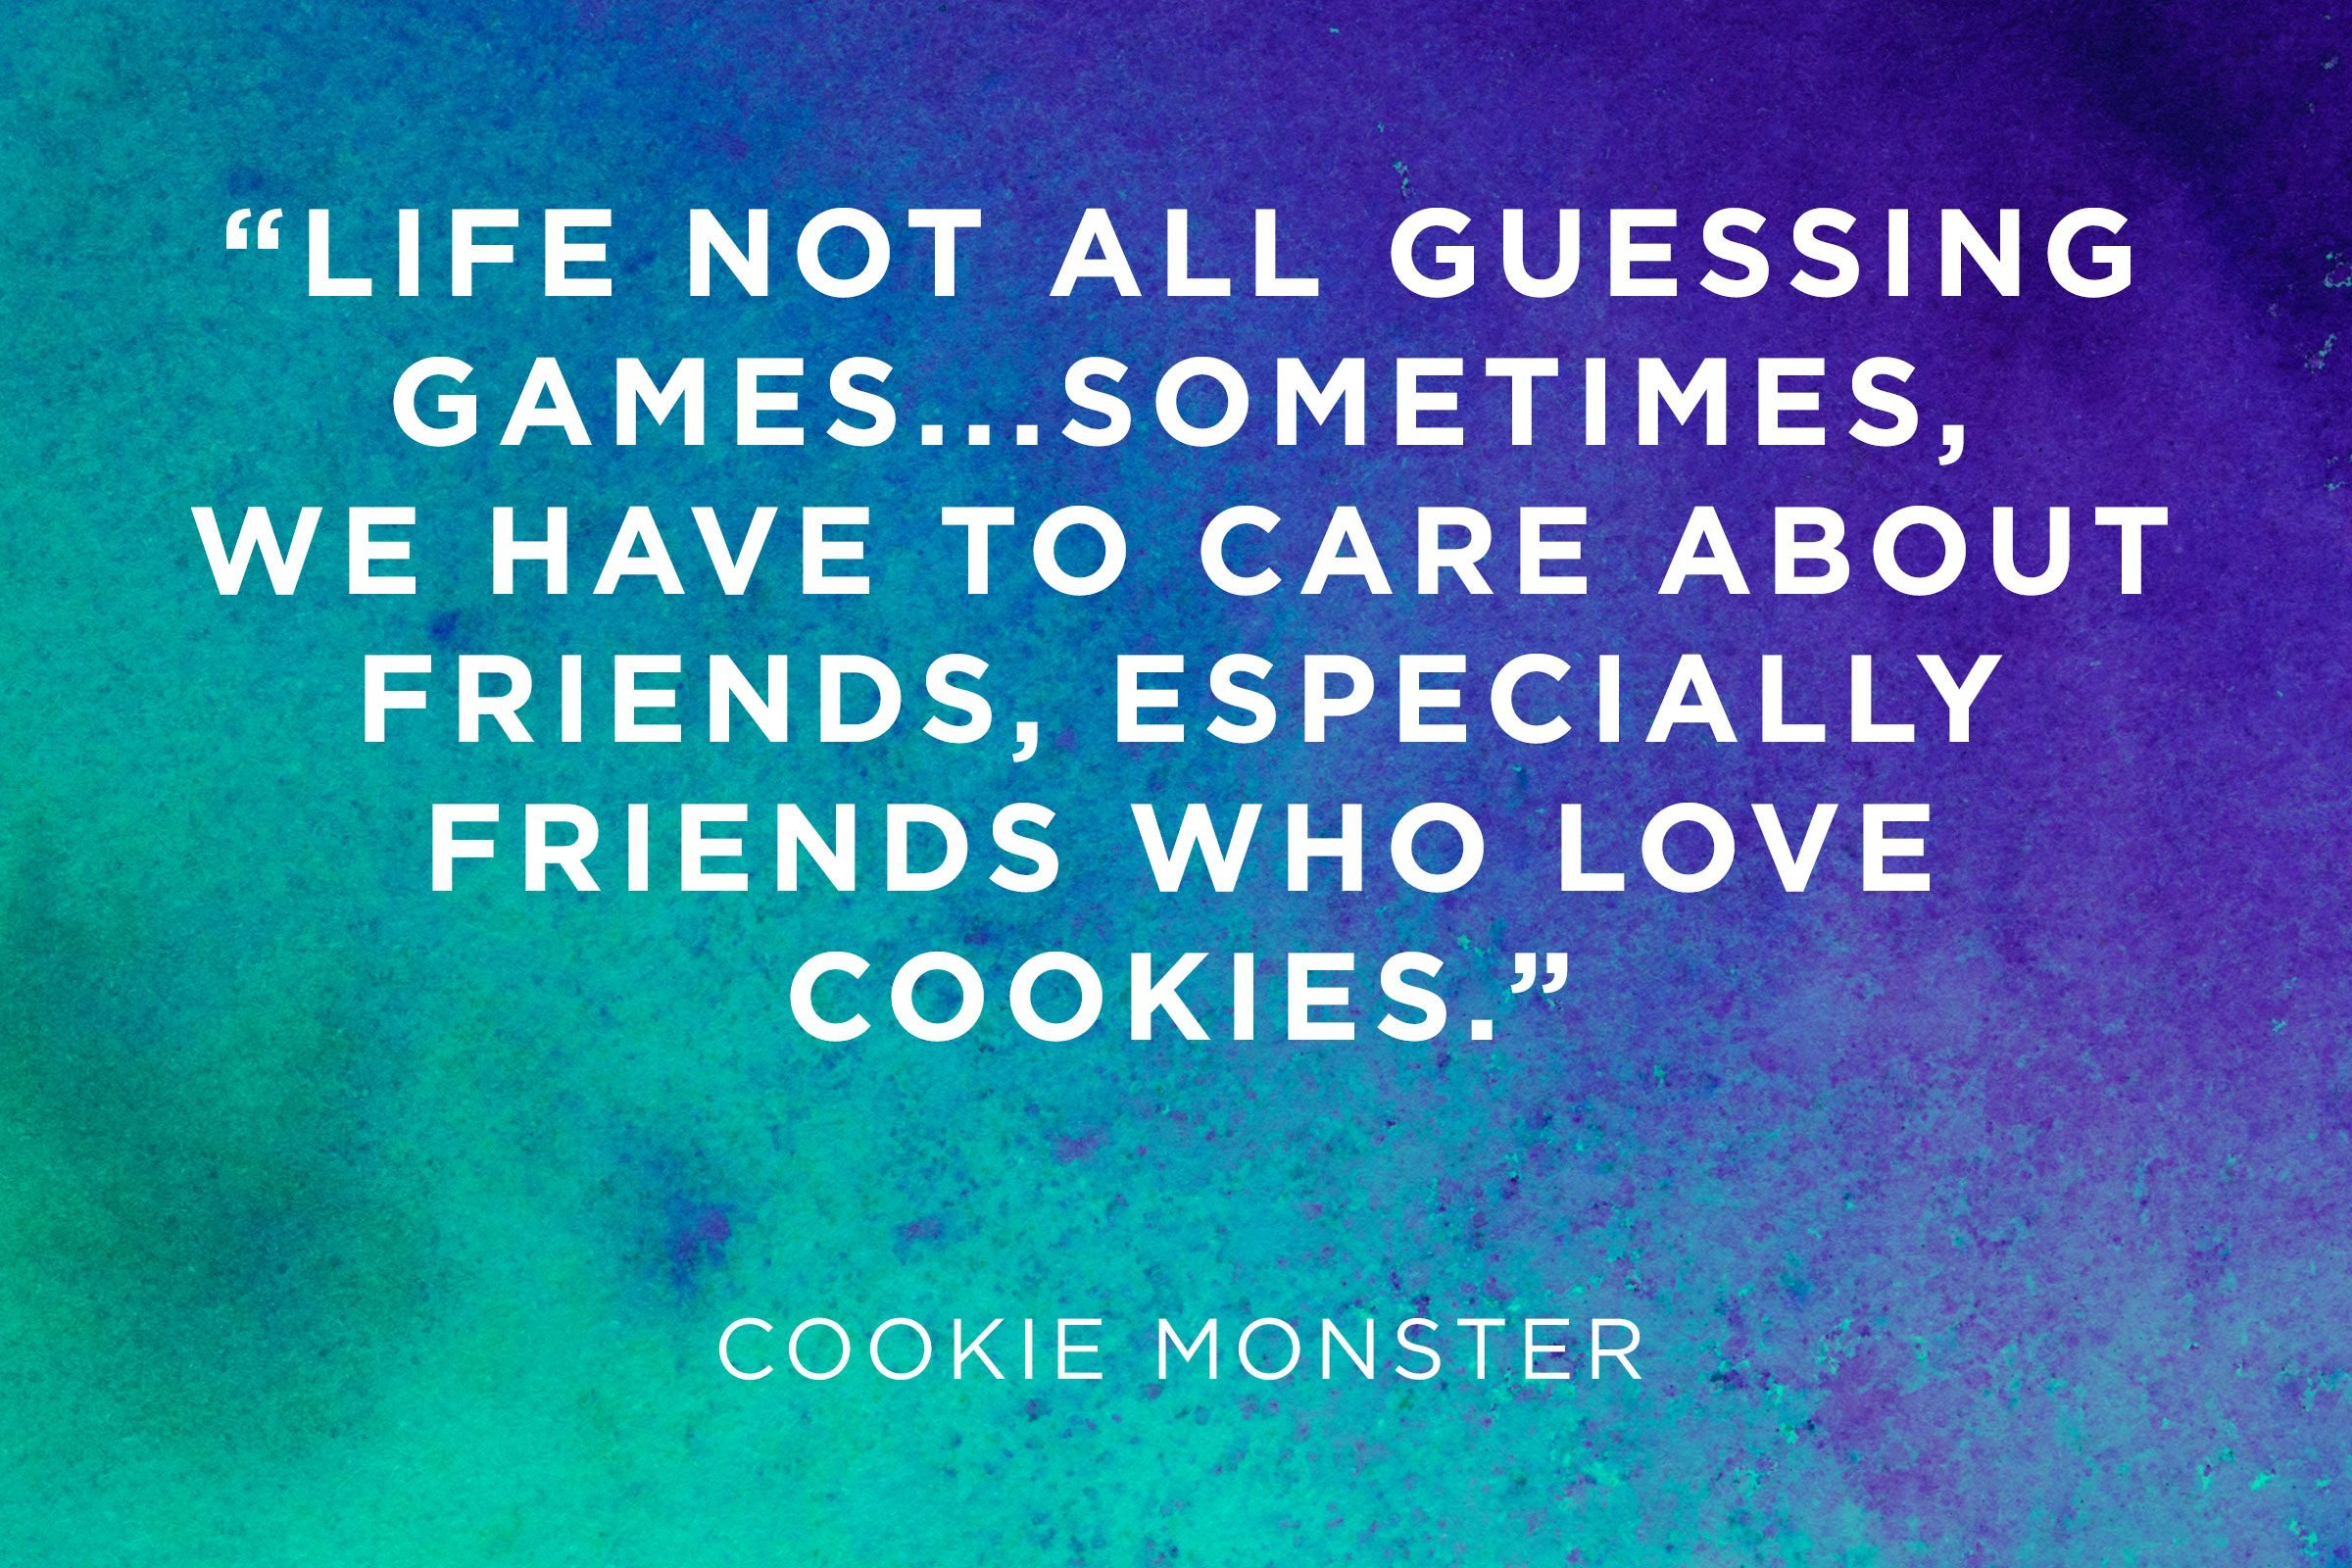 Cookie Monster The meaning of life is friendship